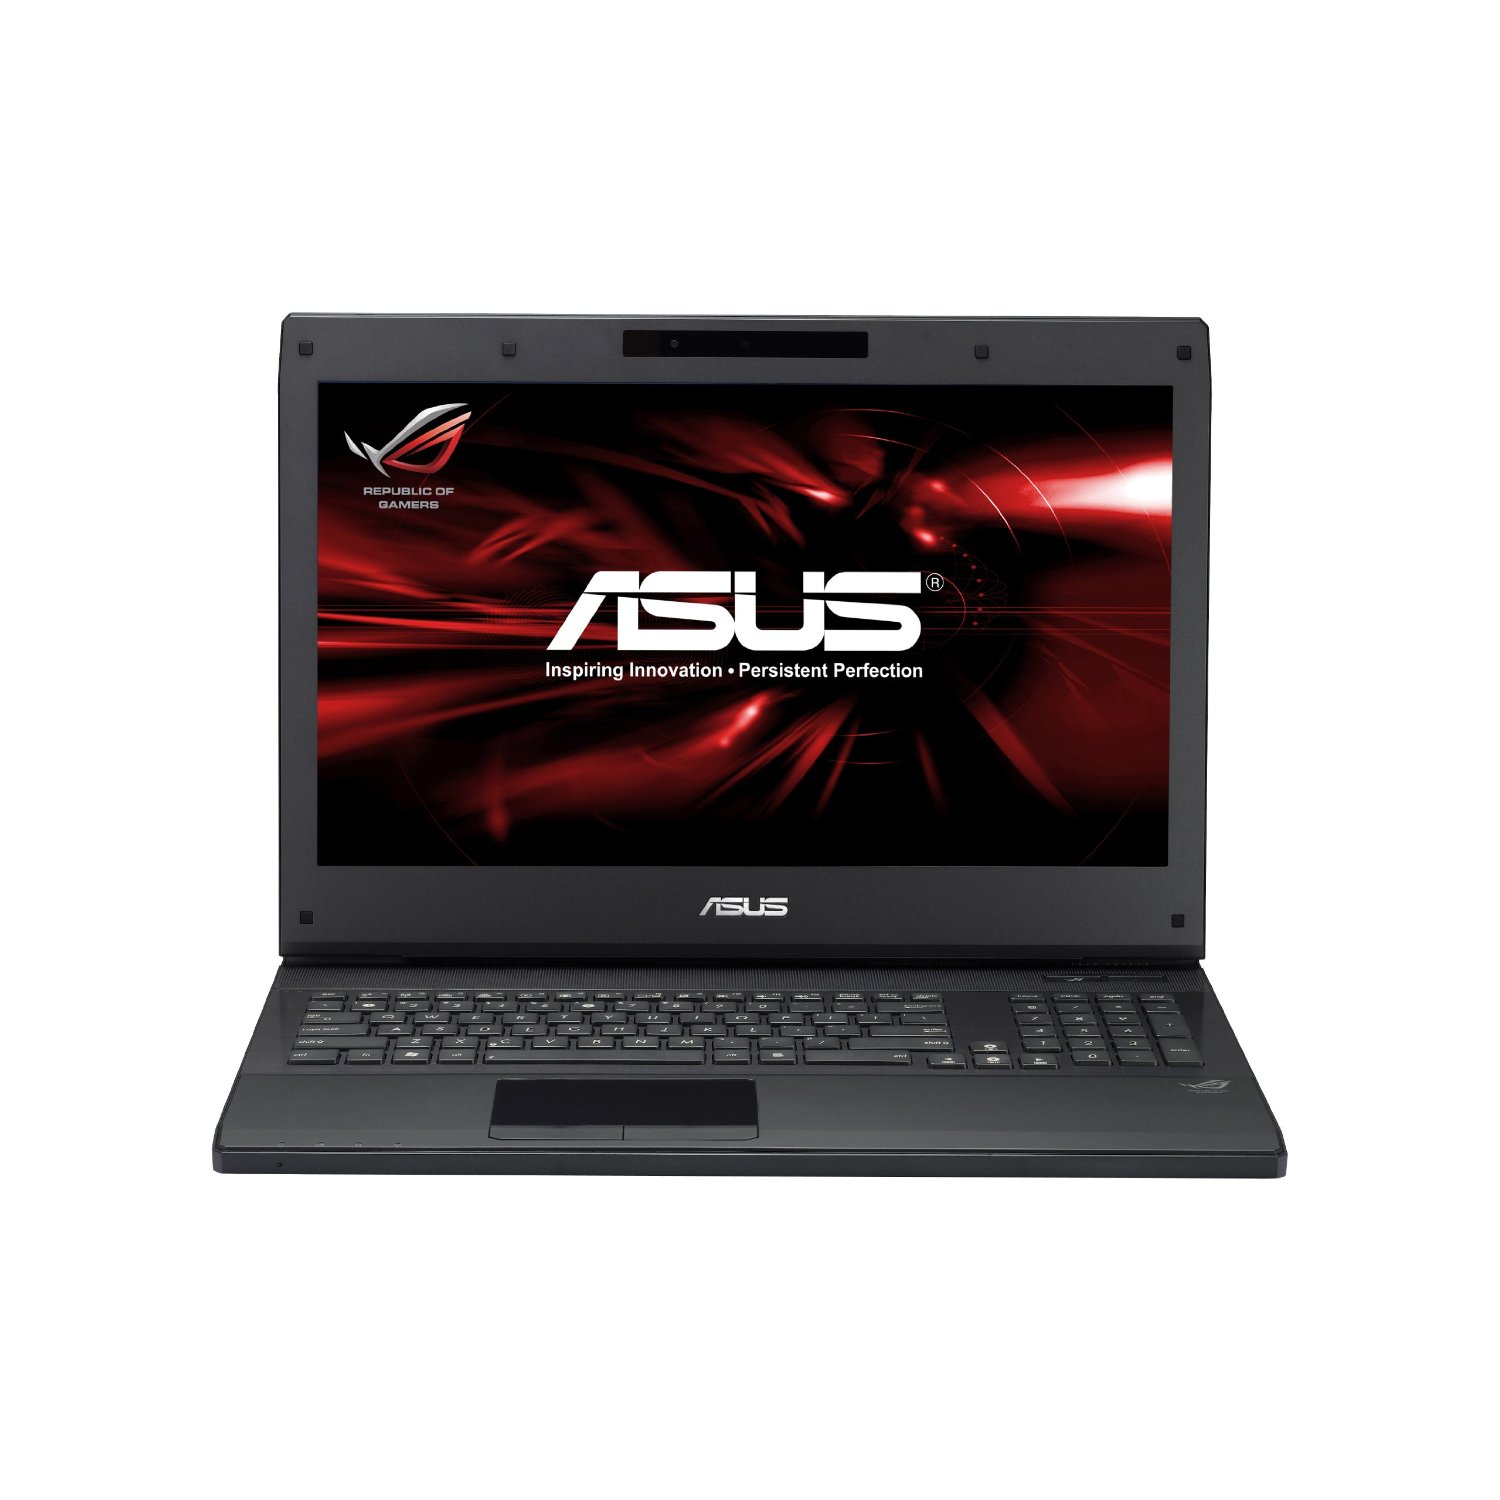 Deal of the Day – ASUS ROG Gaming Laptop